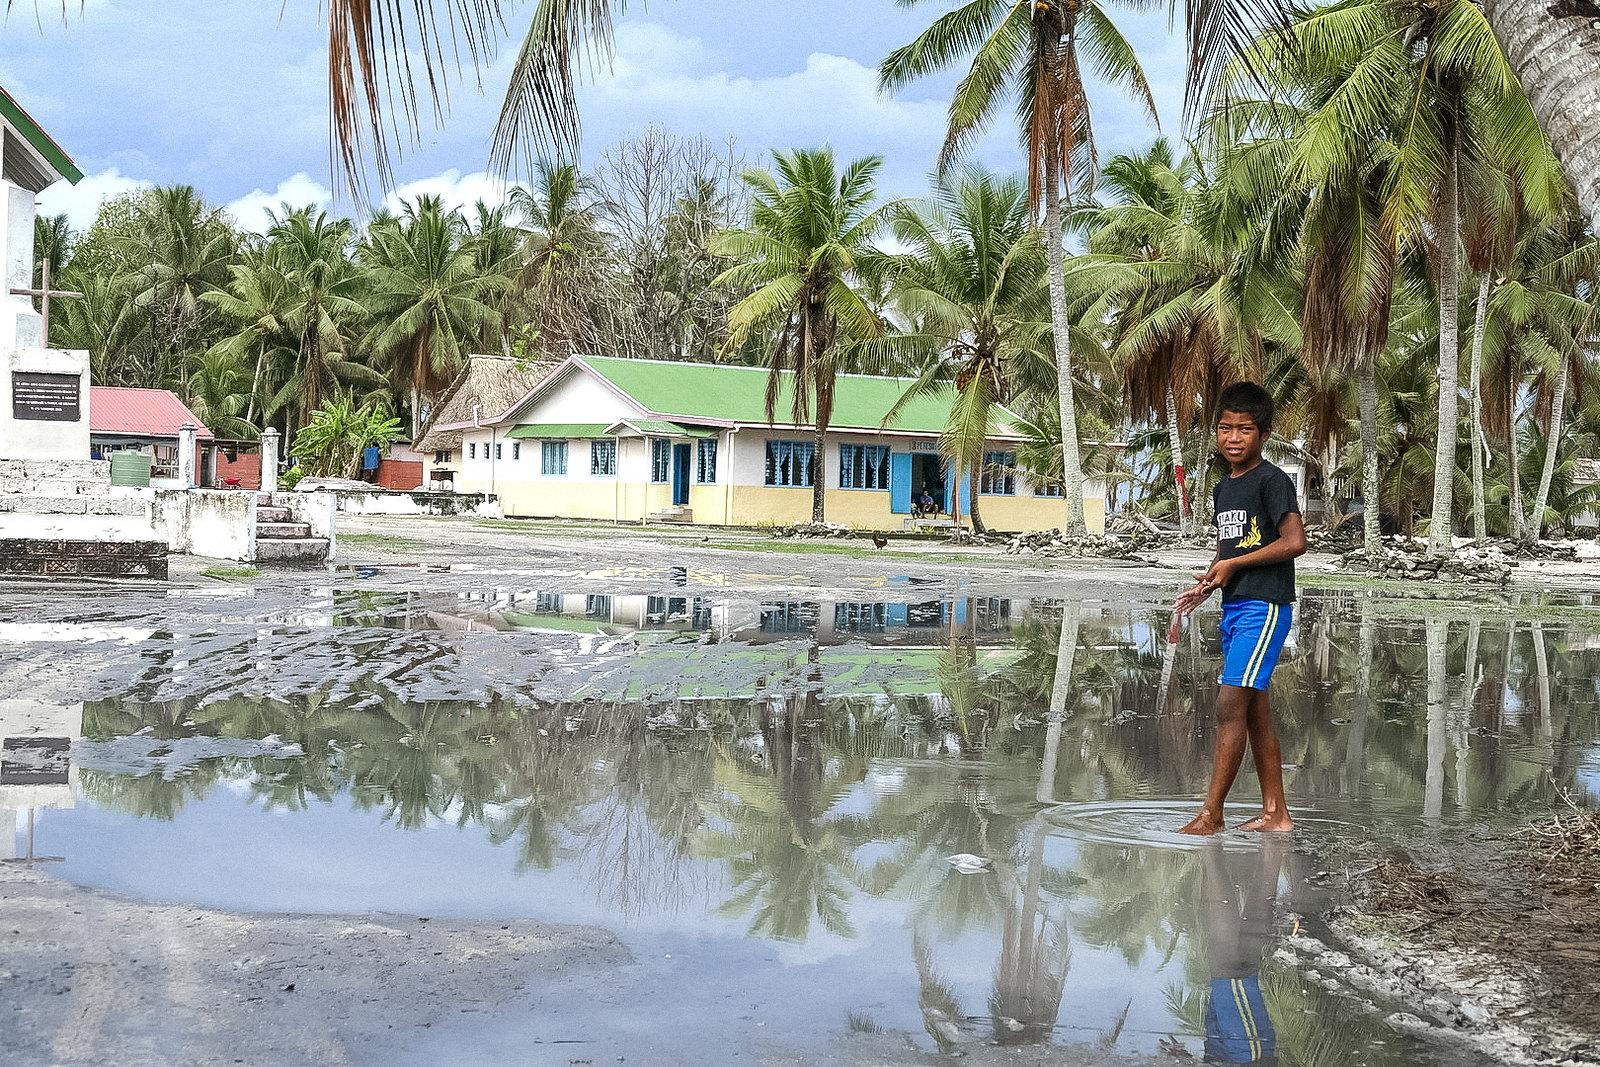 The main square of Nui Island (Tuvalu) is still under water over a month after cyclone pam created huge waves.